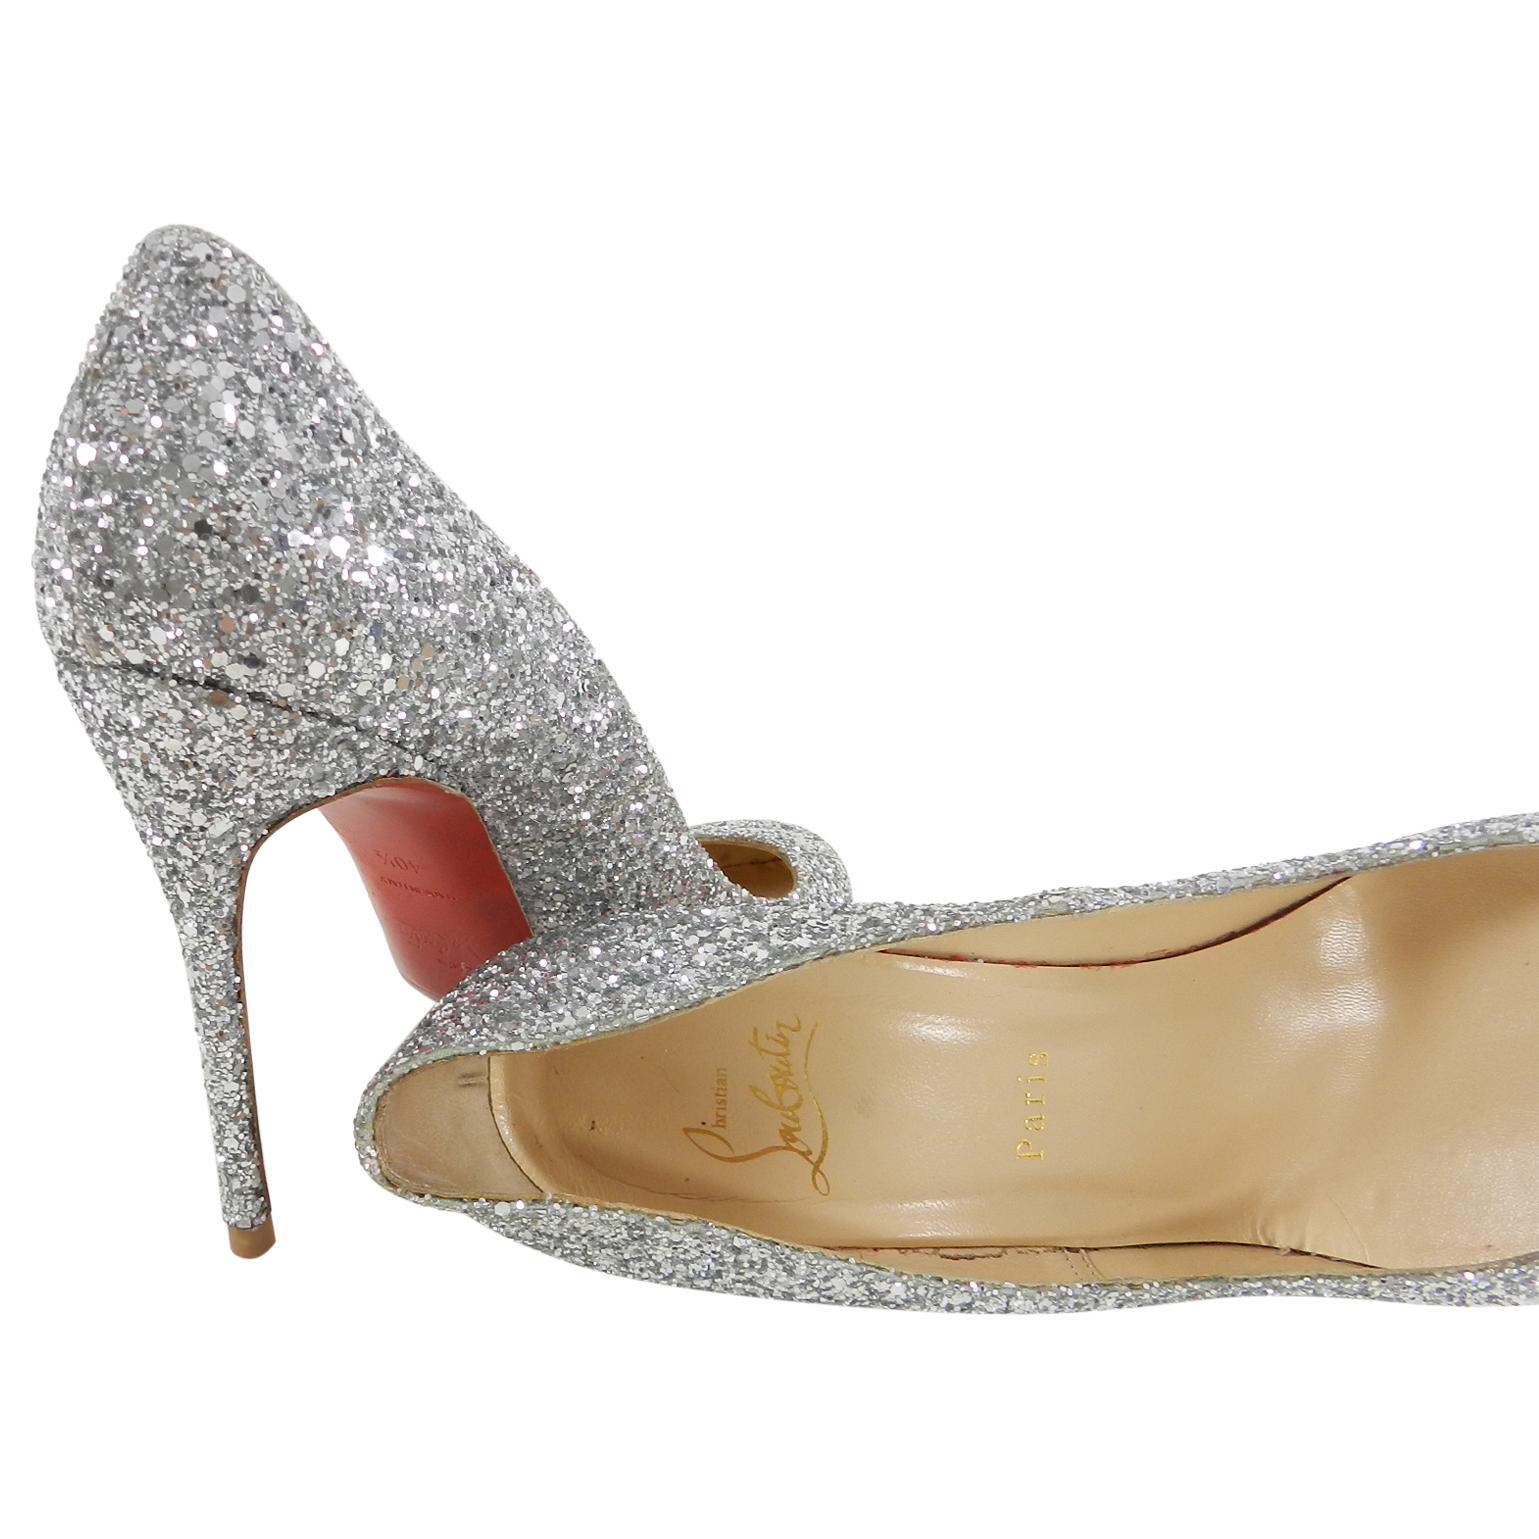 Brown Christian Louboutin Silver Sparkle Glitter Fifille 110 Pumps Heels